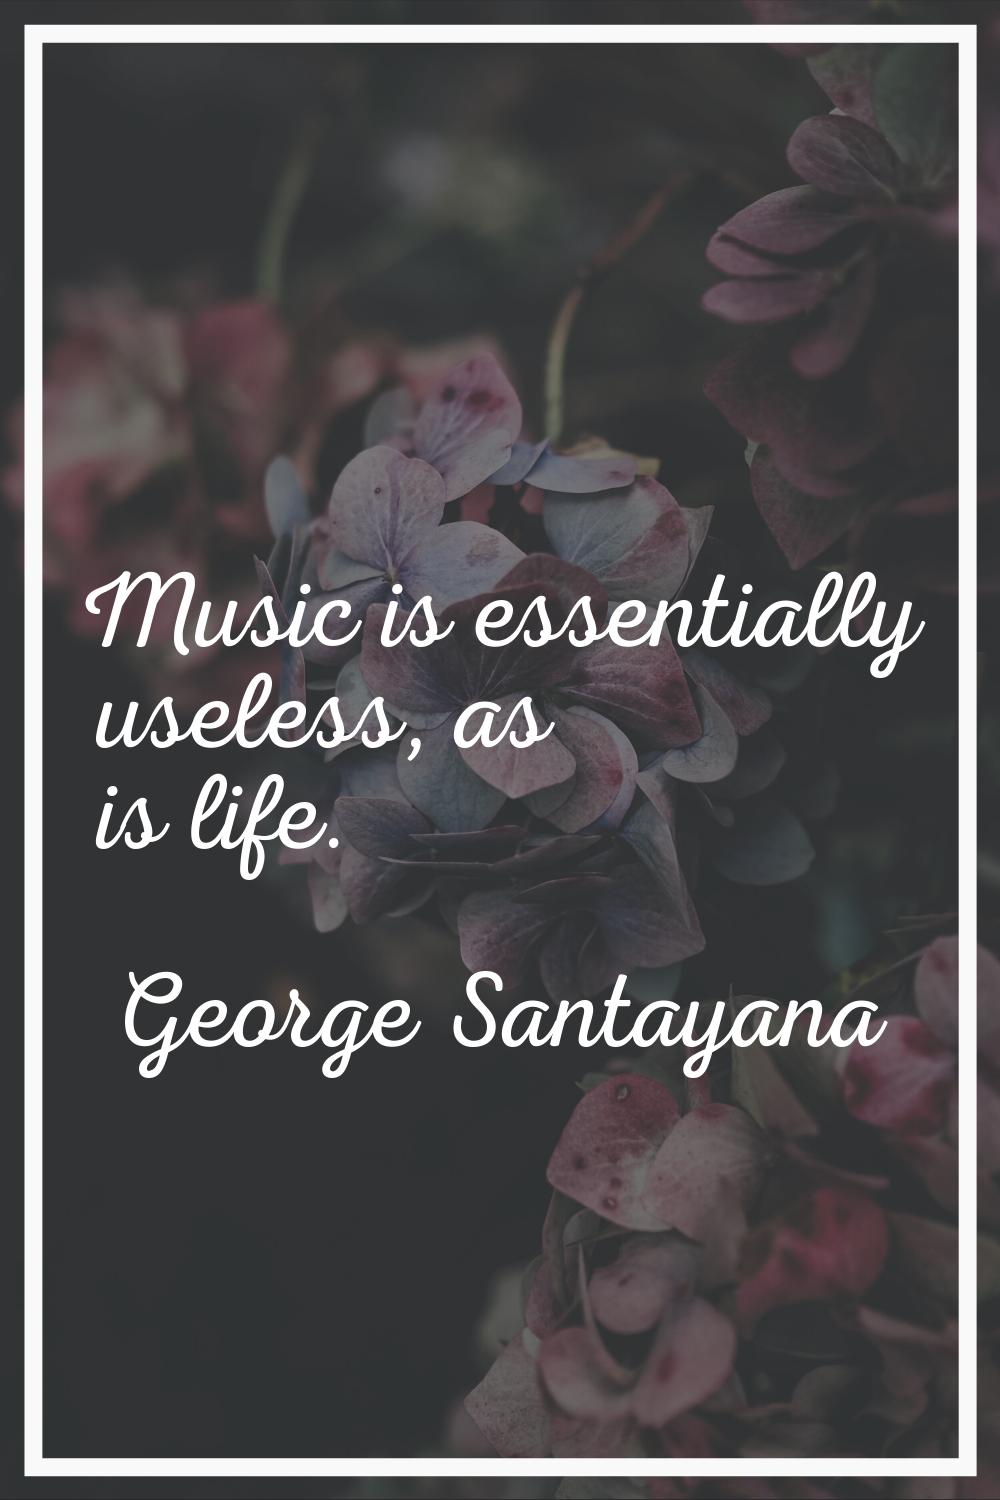 Music is essentially useless, as is life.